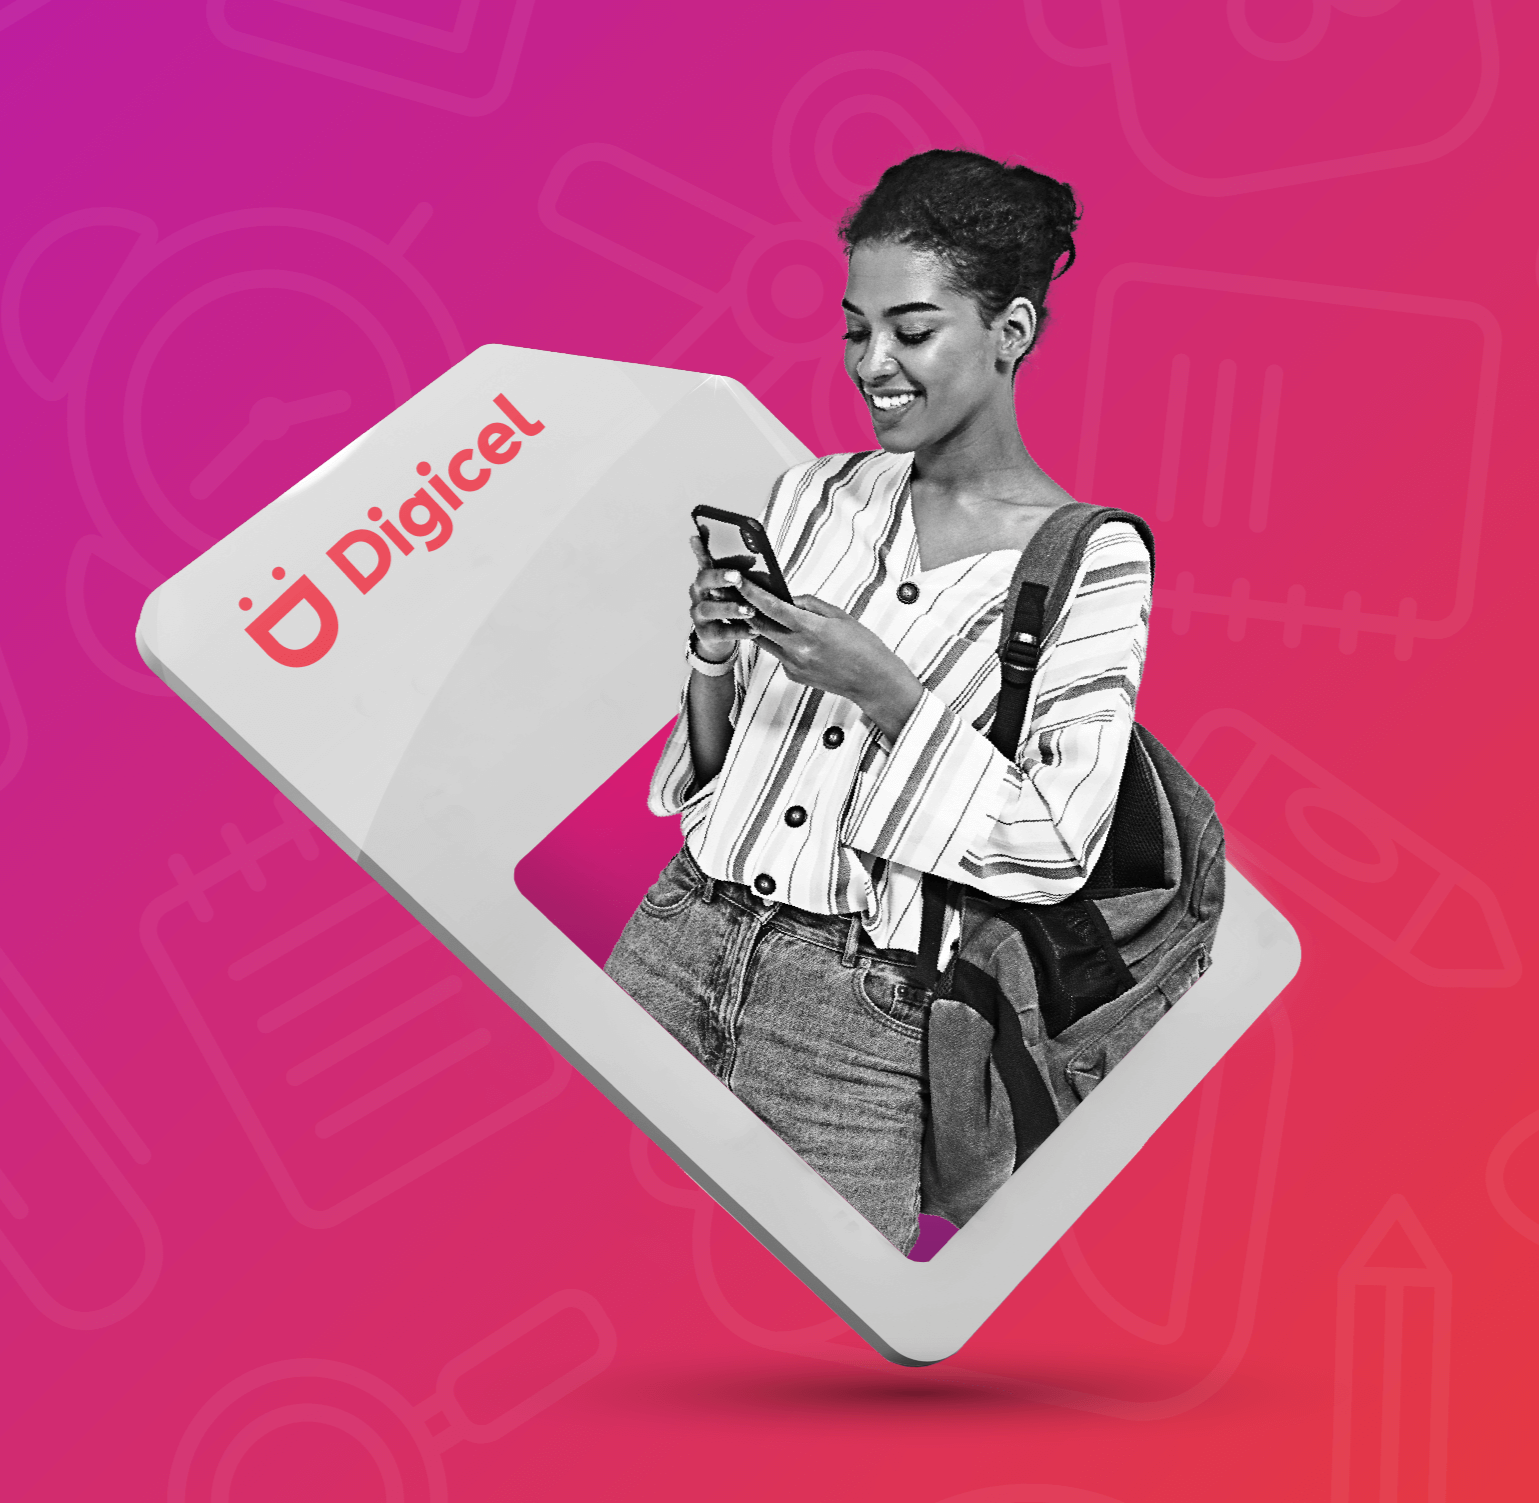 A student wearing a backpack and holding a mobile phone, next to a Digicel SIM card